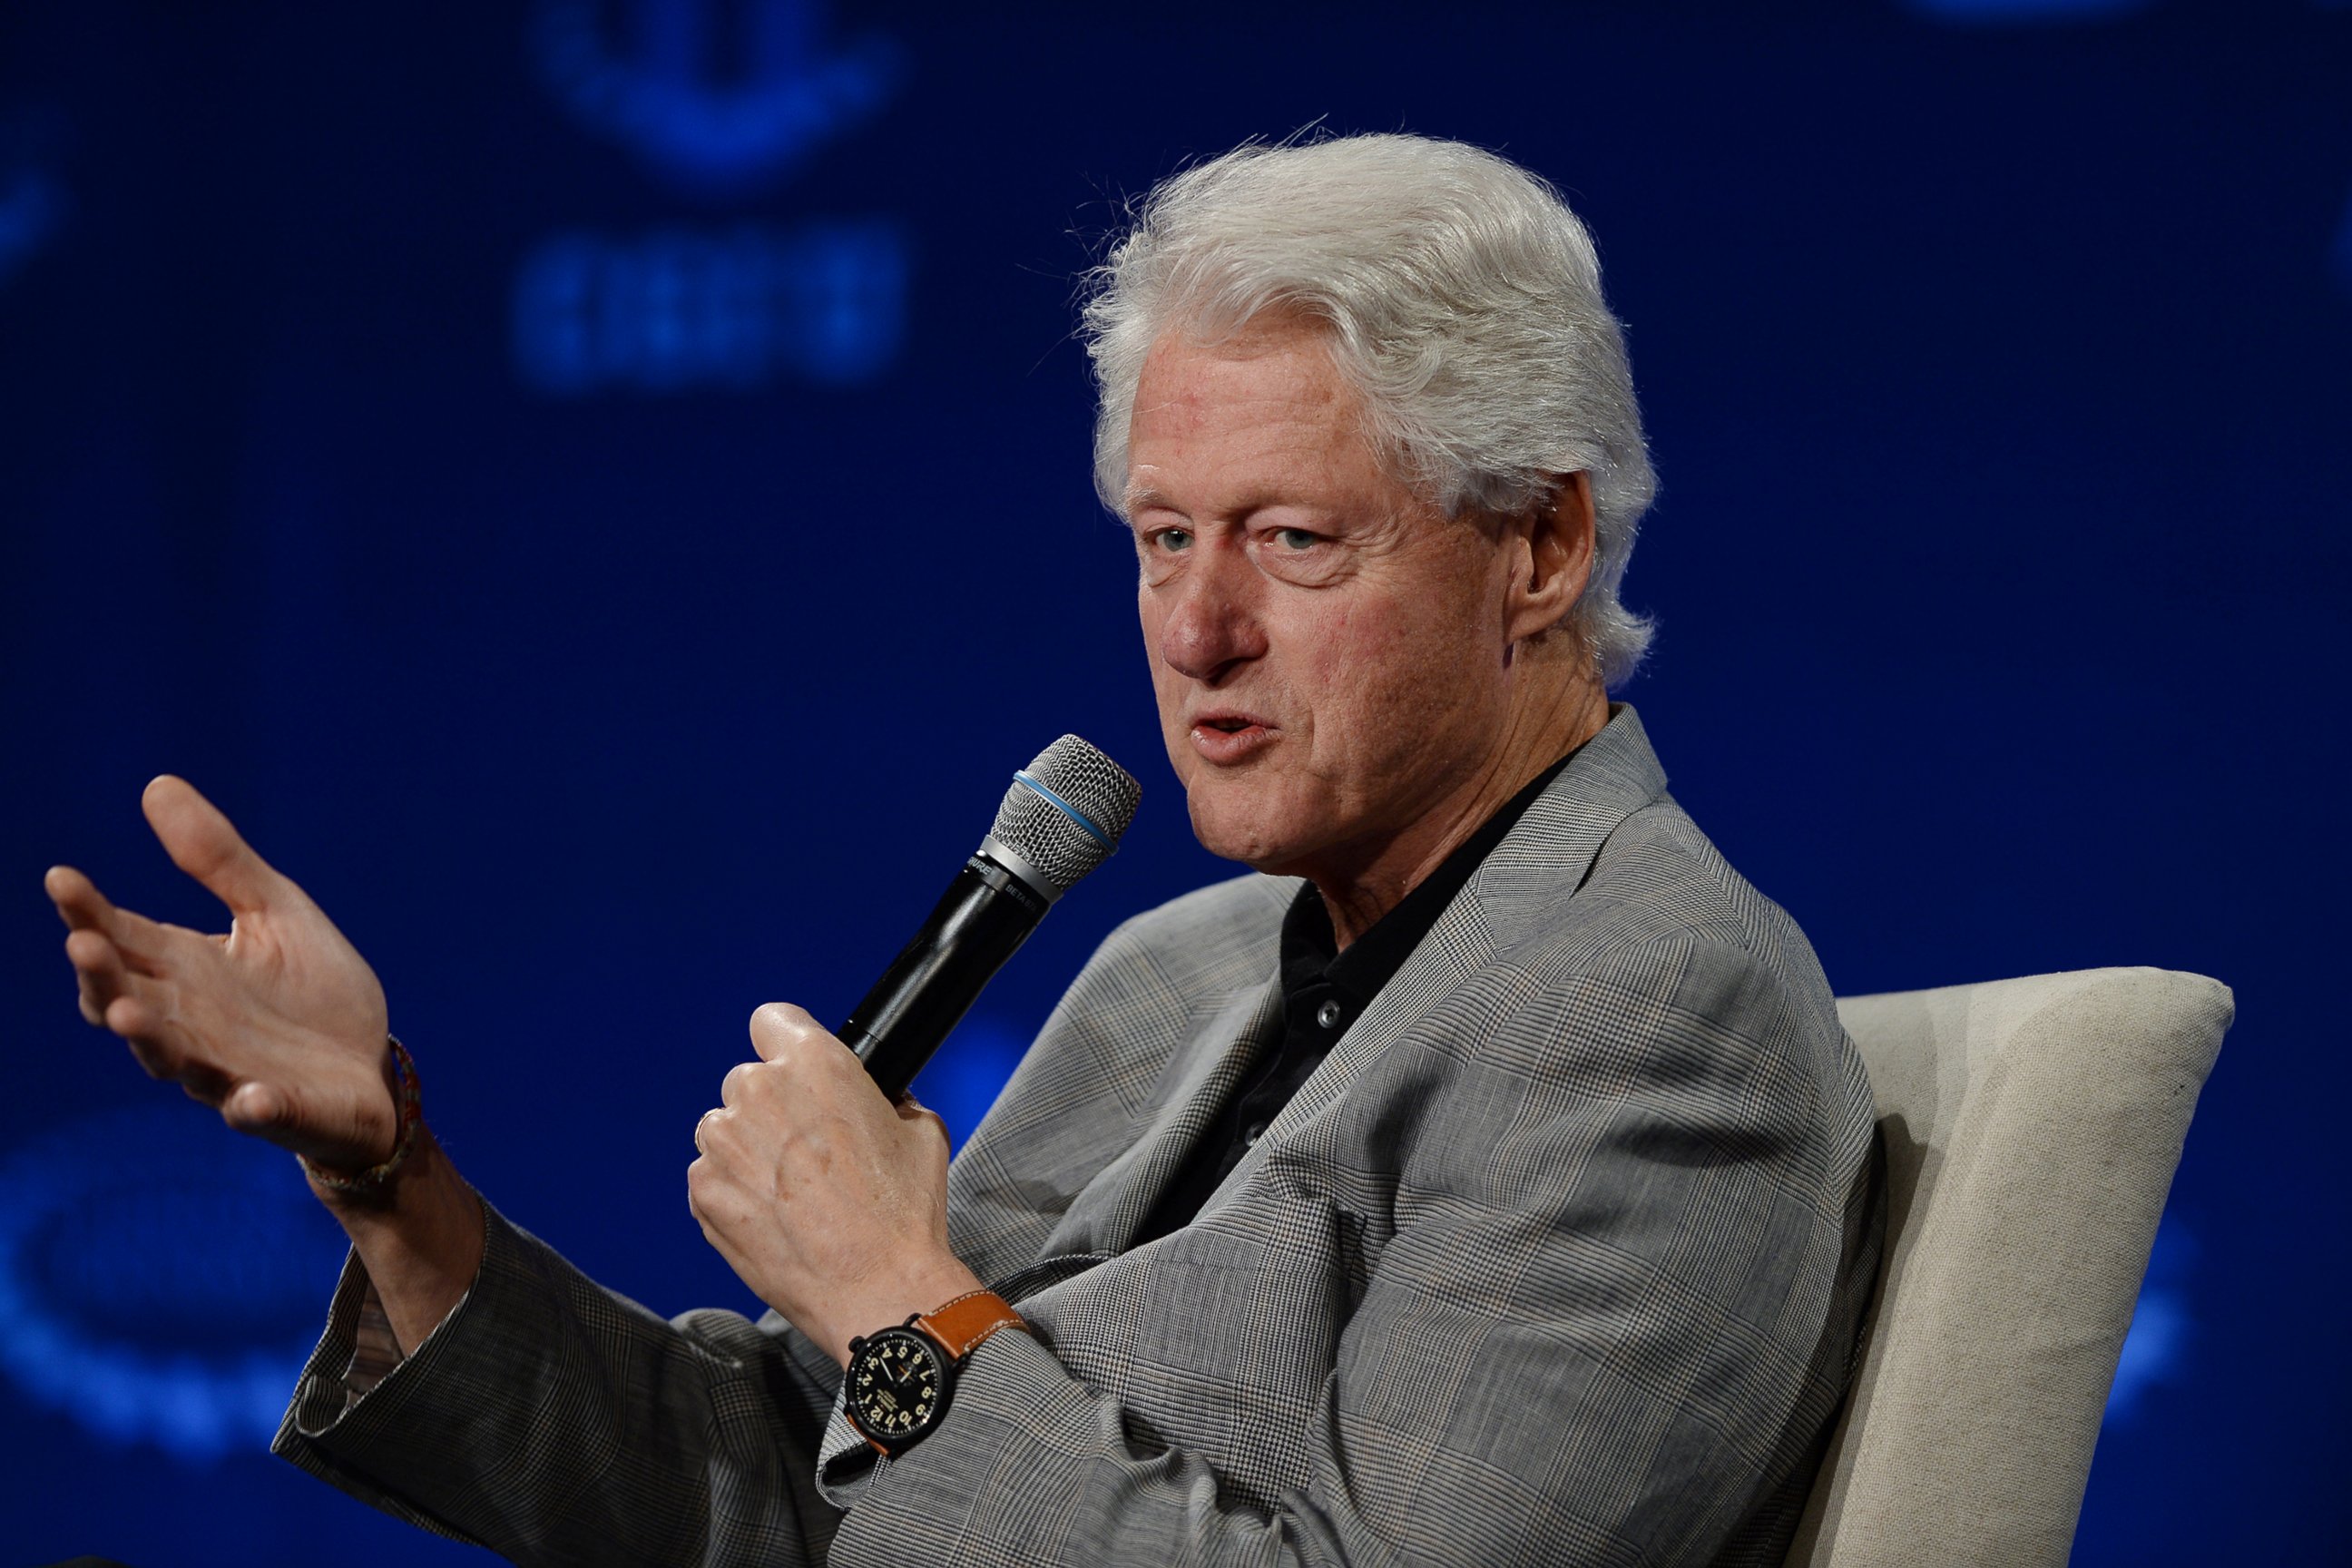 PHOTO: Former US President Bill Clinton attends the Clinton Global Initiative University at University of Miami on March 7, 2015 in Miami, Florida.